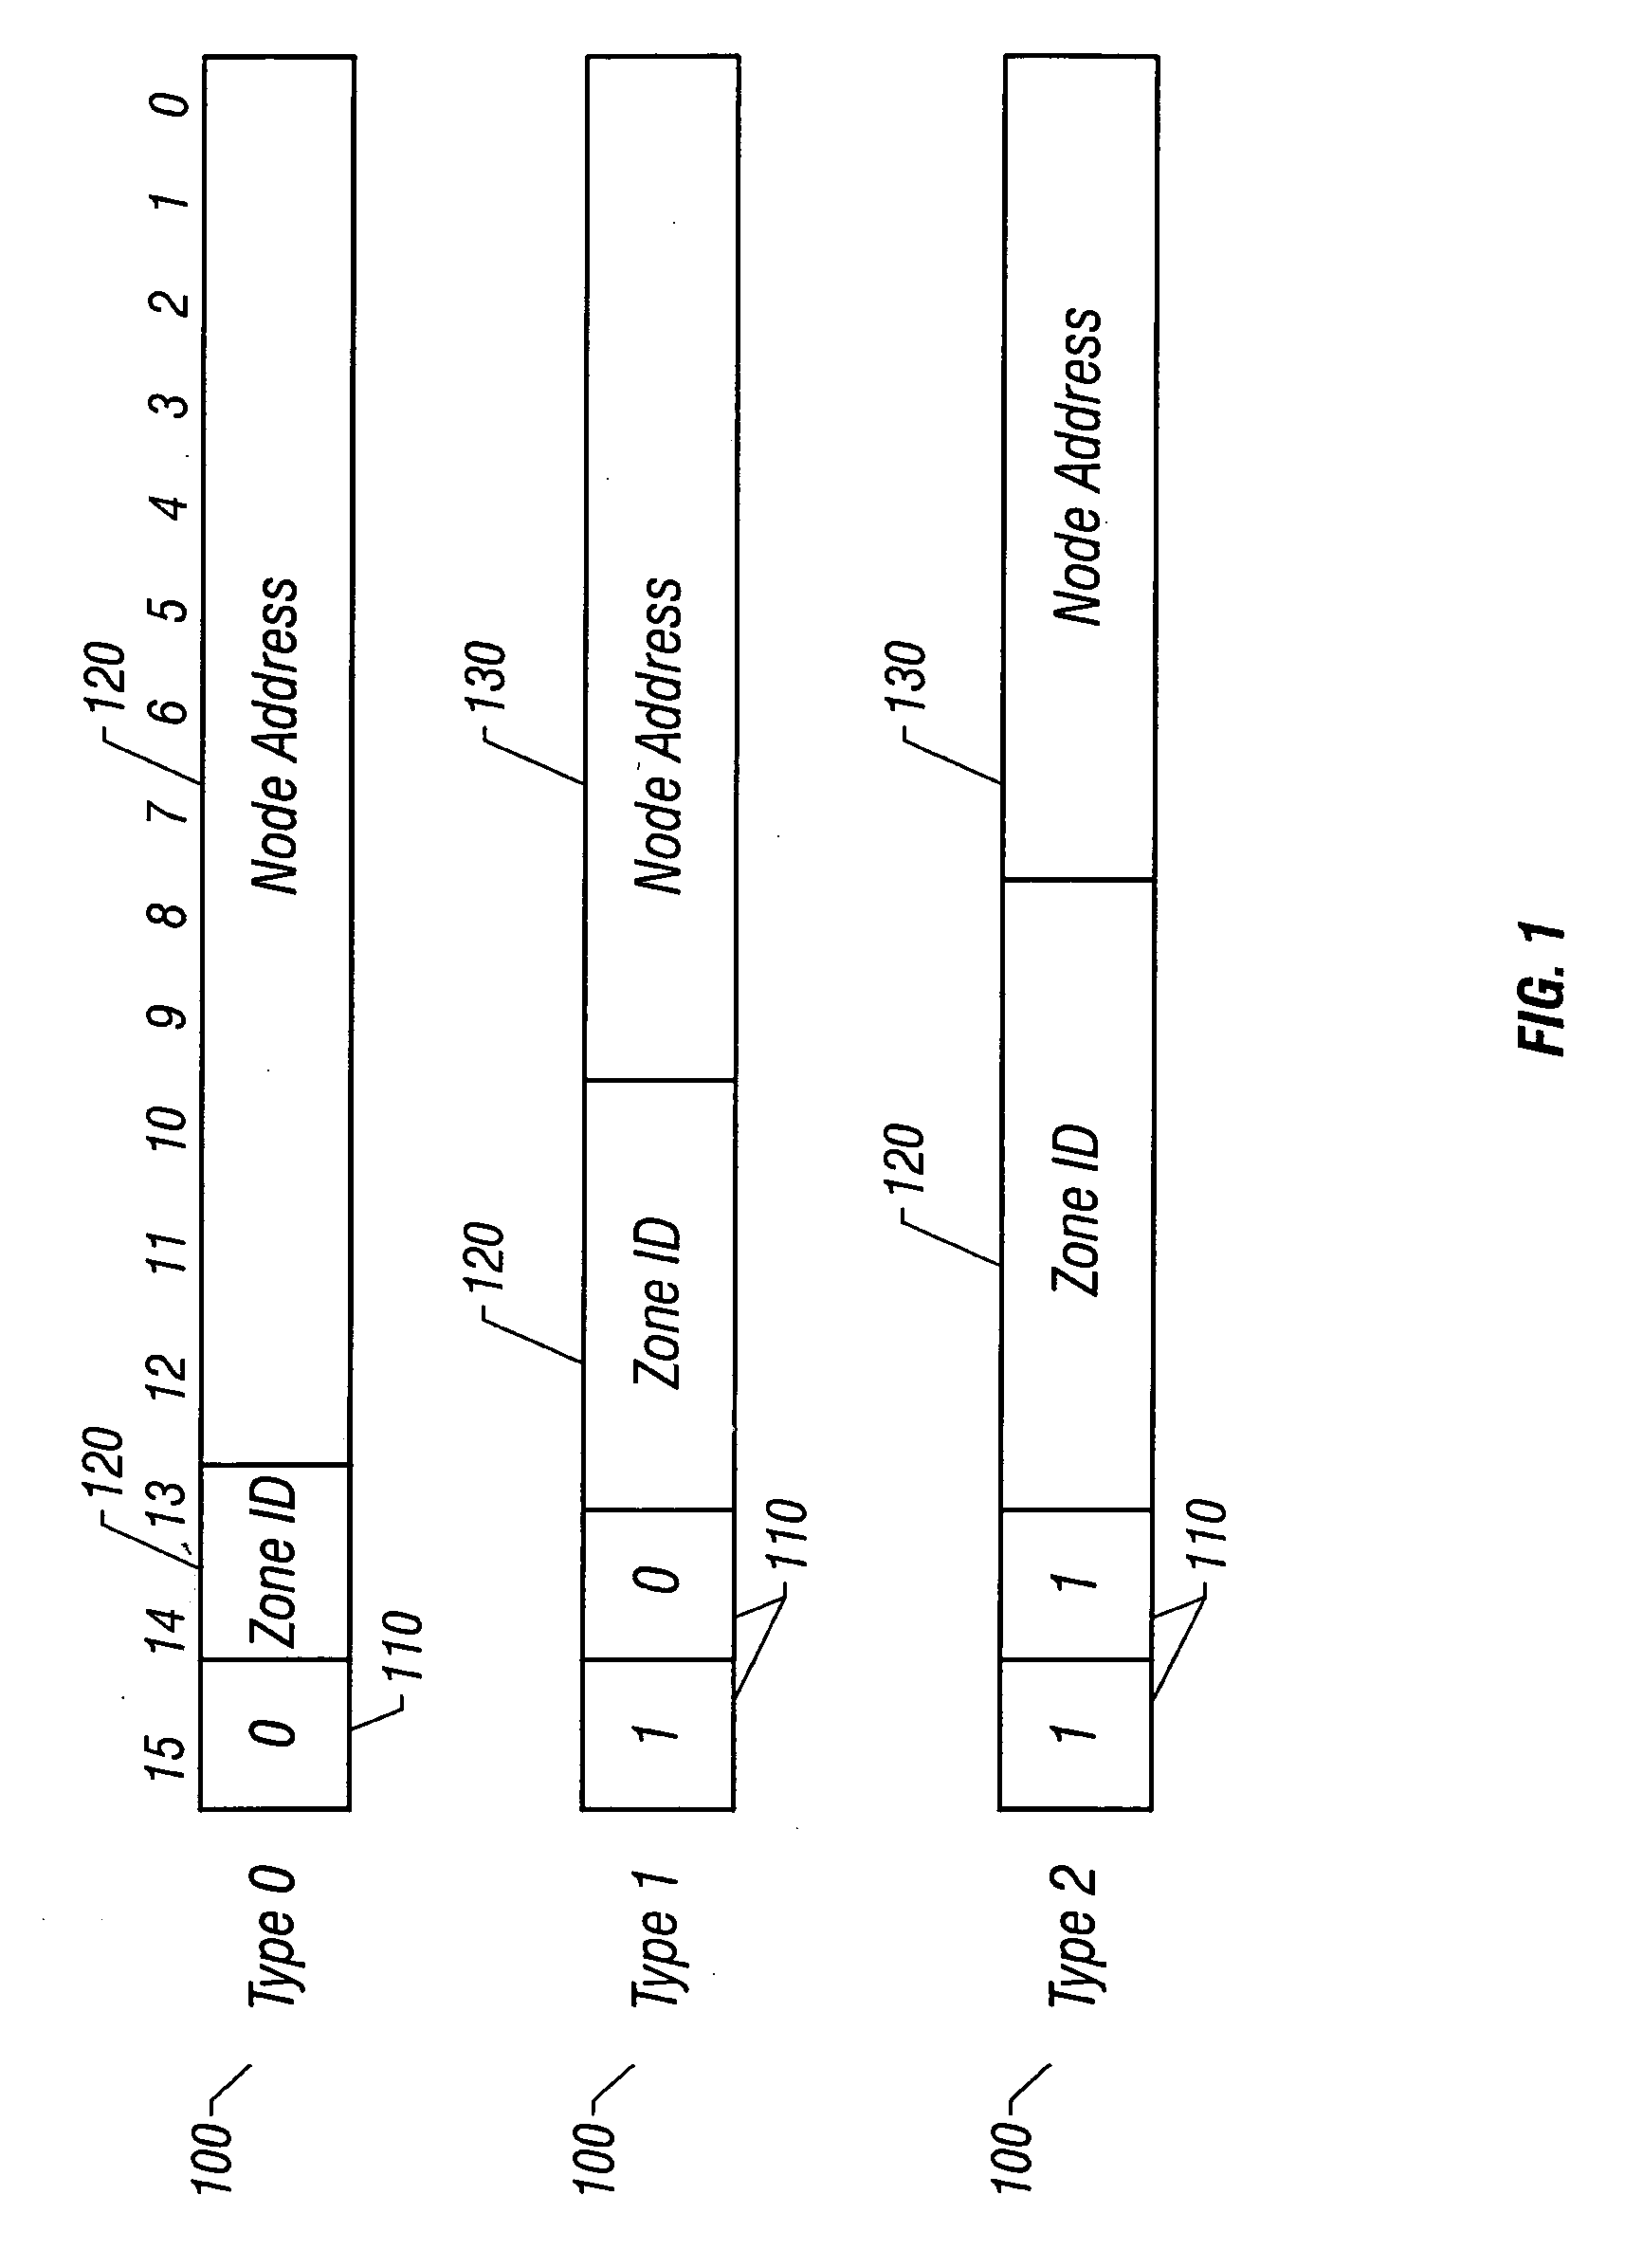 Method for routing information over a network employing centralized control